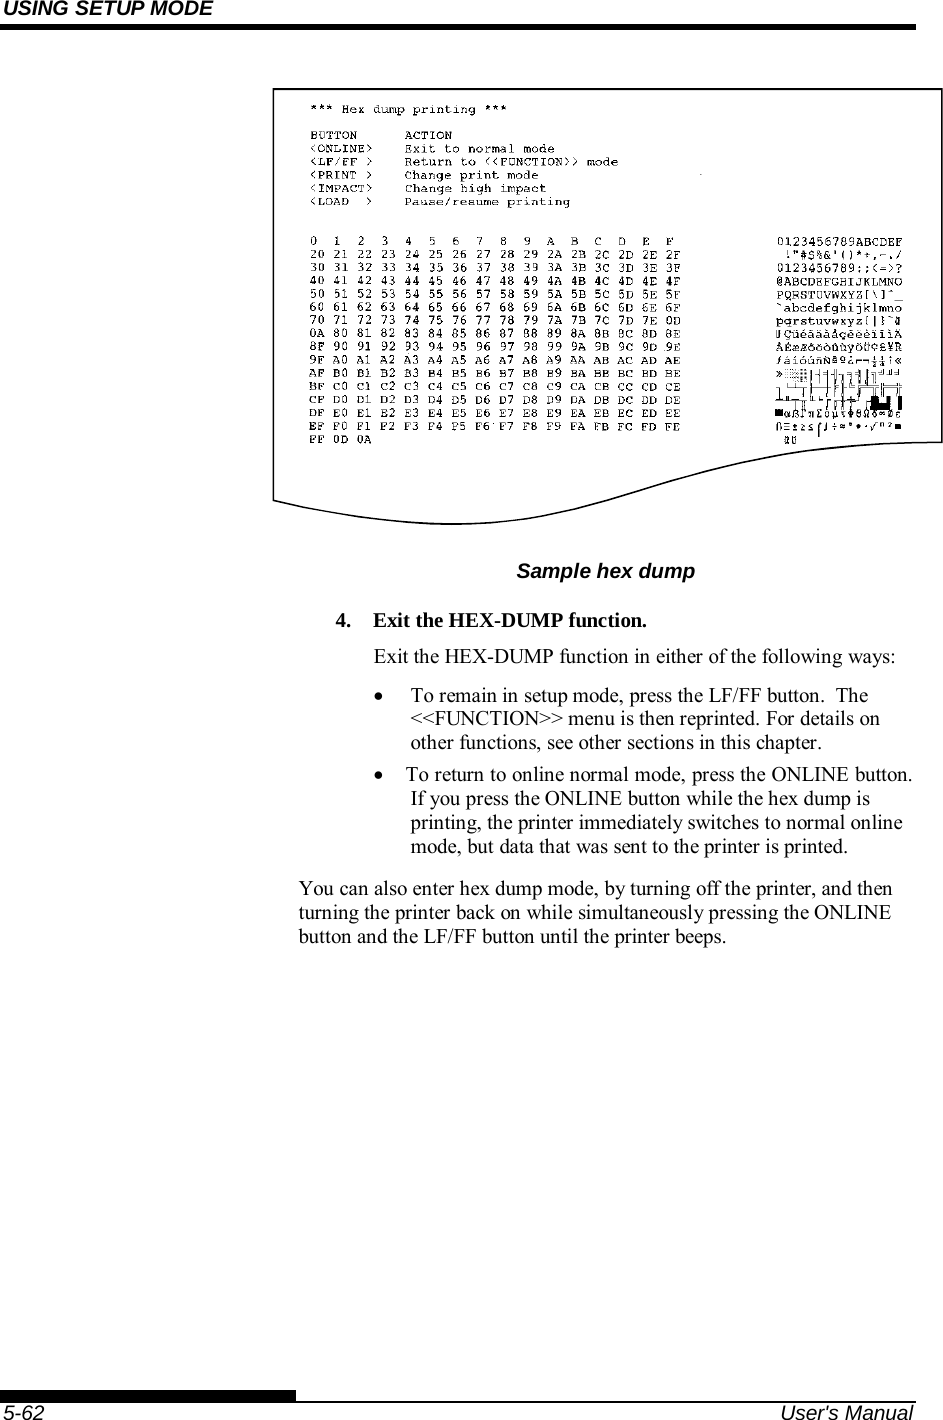 USING SETUP MODE    5-62  User&apos;s Manual    Sample hex dump 4.  Exit the HEX-DUMP function. Exit the HEX-DUMP function in either of the following ways:   To remain in setup mode, press the LF/FF button.  The &lt;&lt;FUNCTION&gt;&gt; menu is then reprinted. For details on other functions, see other sections in this chapter.   To return to online normal mode, press the ONLINE button. If you press the ONLINE button while the hex dump is printing, the printer immediately switches to normal online mode, but data that was sent to the printer is printed. You can also enter hex dump mode, by turning off the printer, and then turning the printer back on while simultaneously pressing the ONLINE button and the LF/FF button until the printer beeps. 